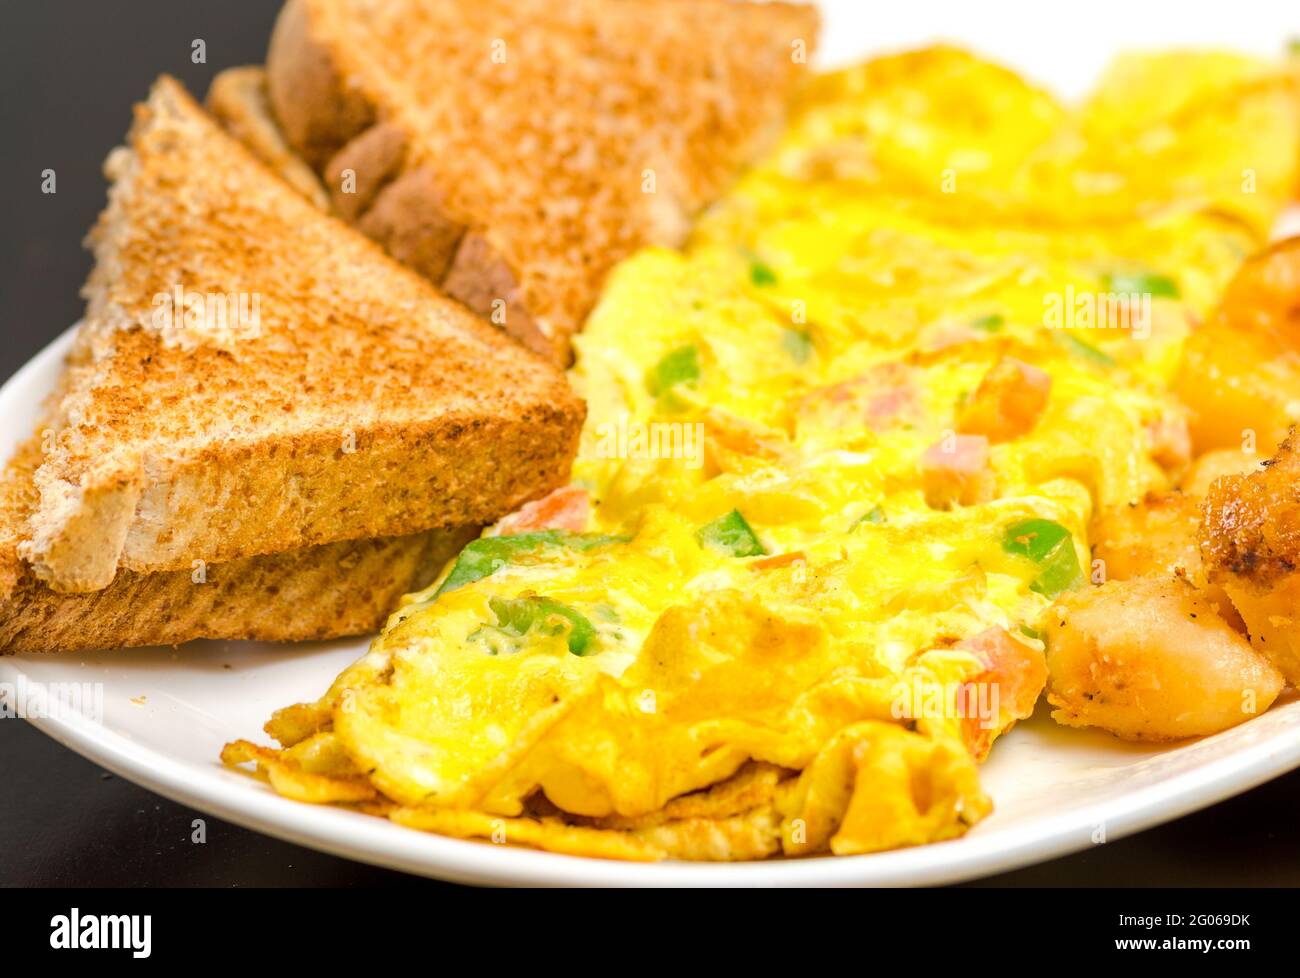 Omelette and toasts. Food with a dark background Stock Photo